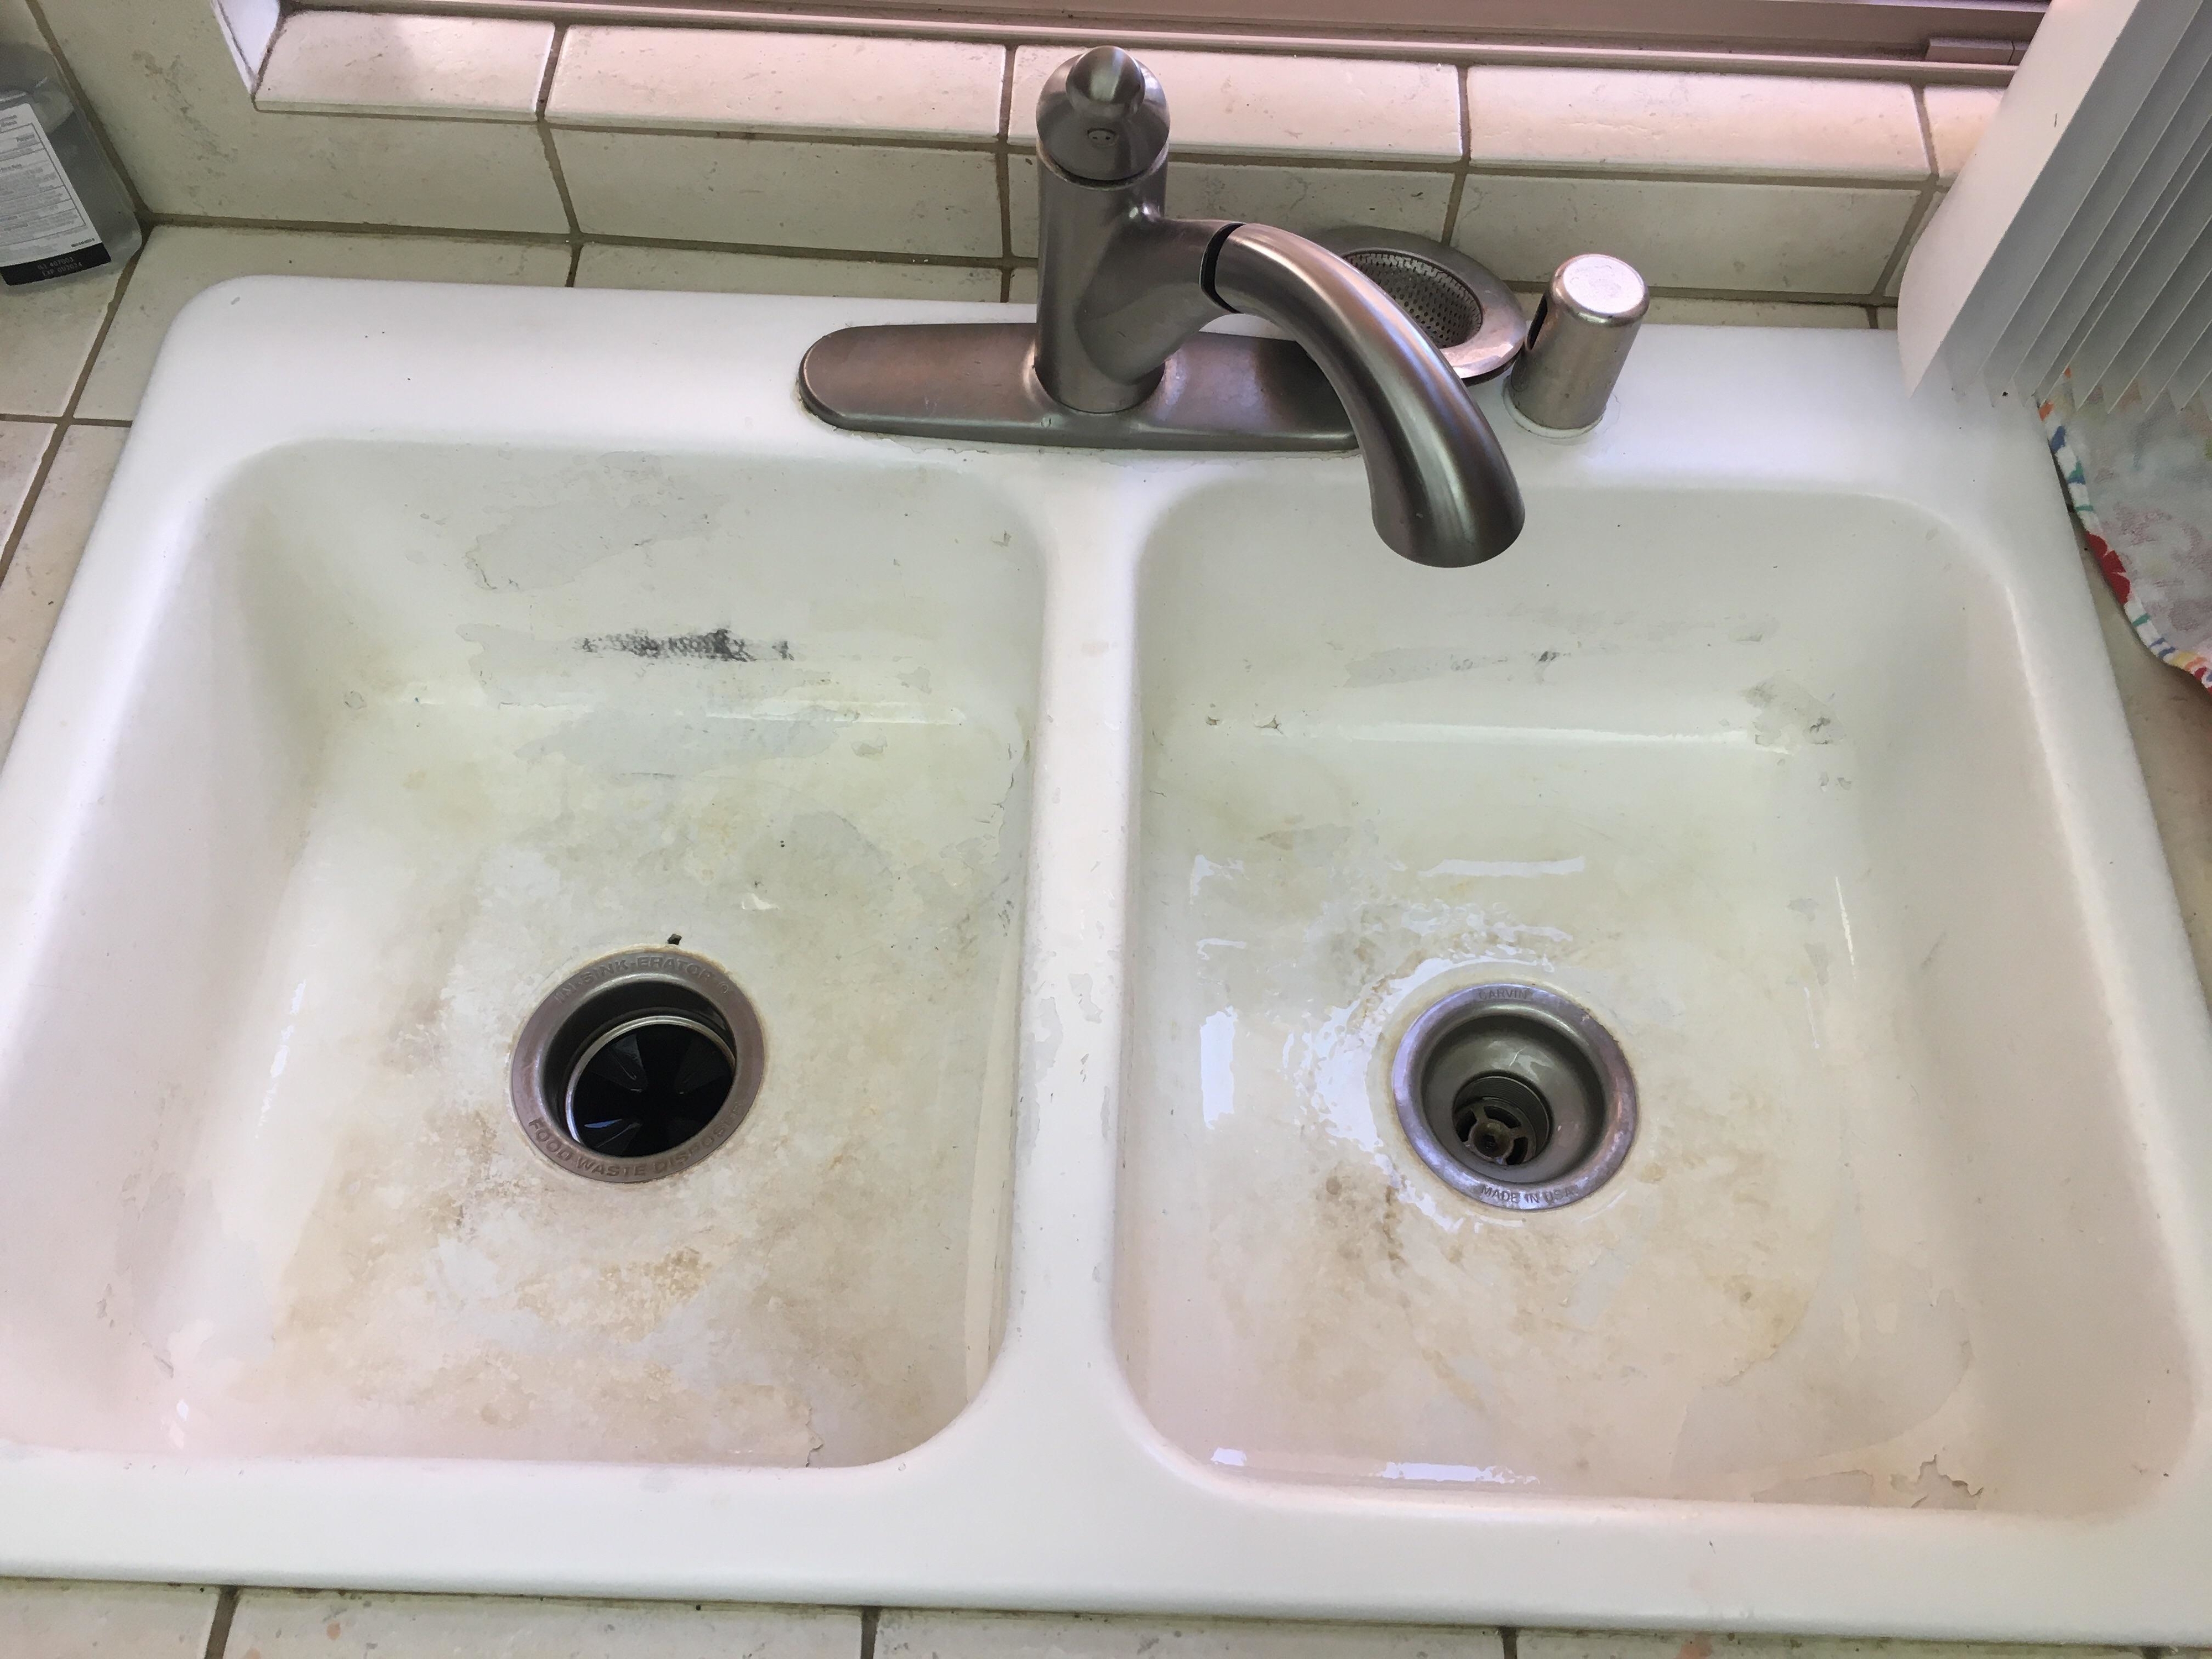 A dirty double kitchen sink with visible grime and no dishes